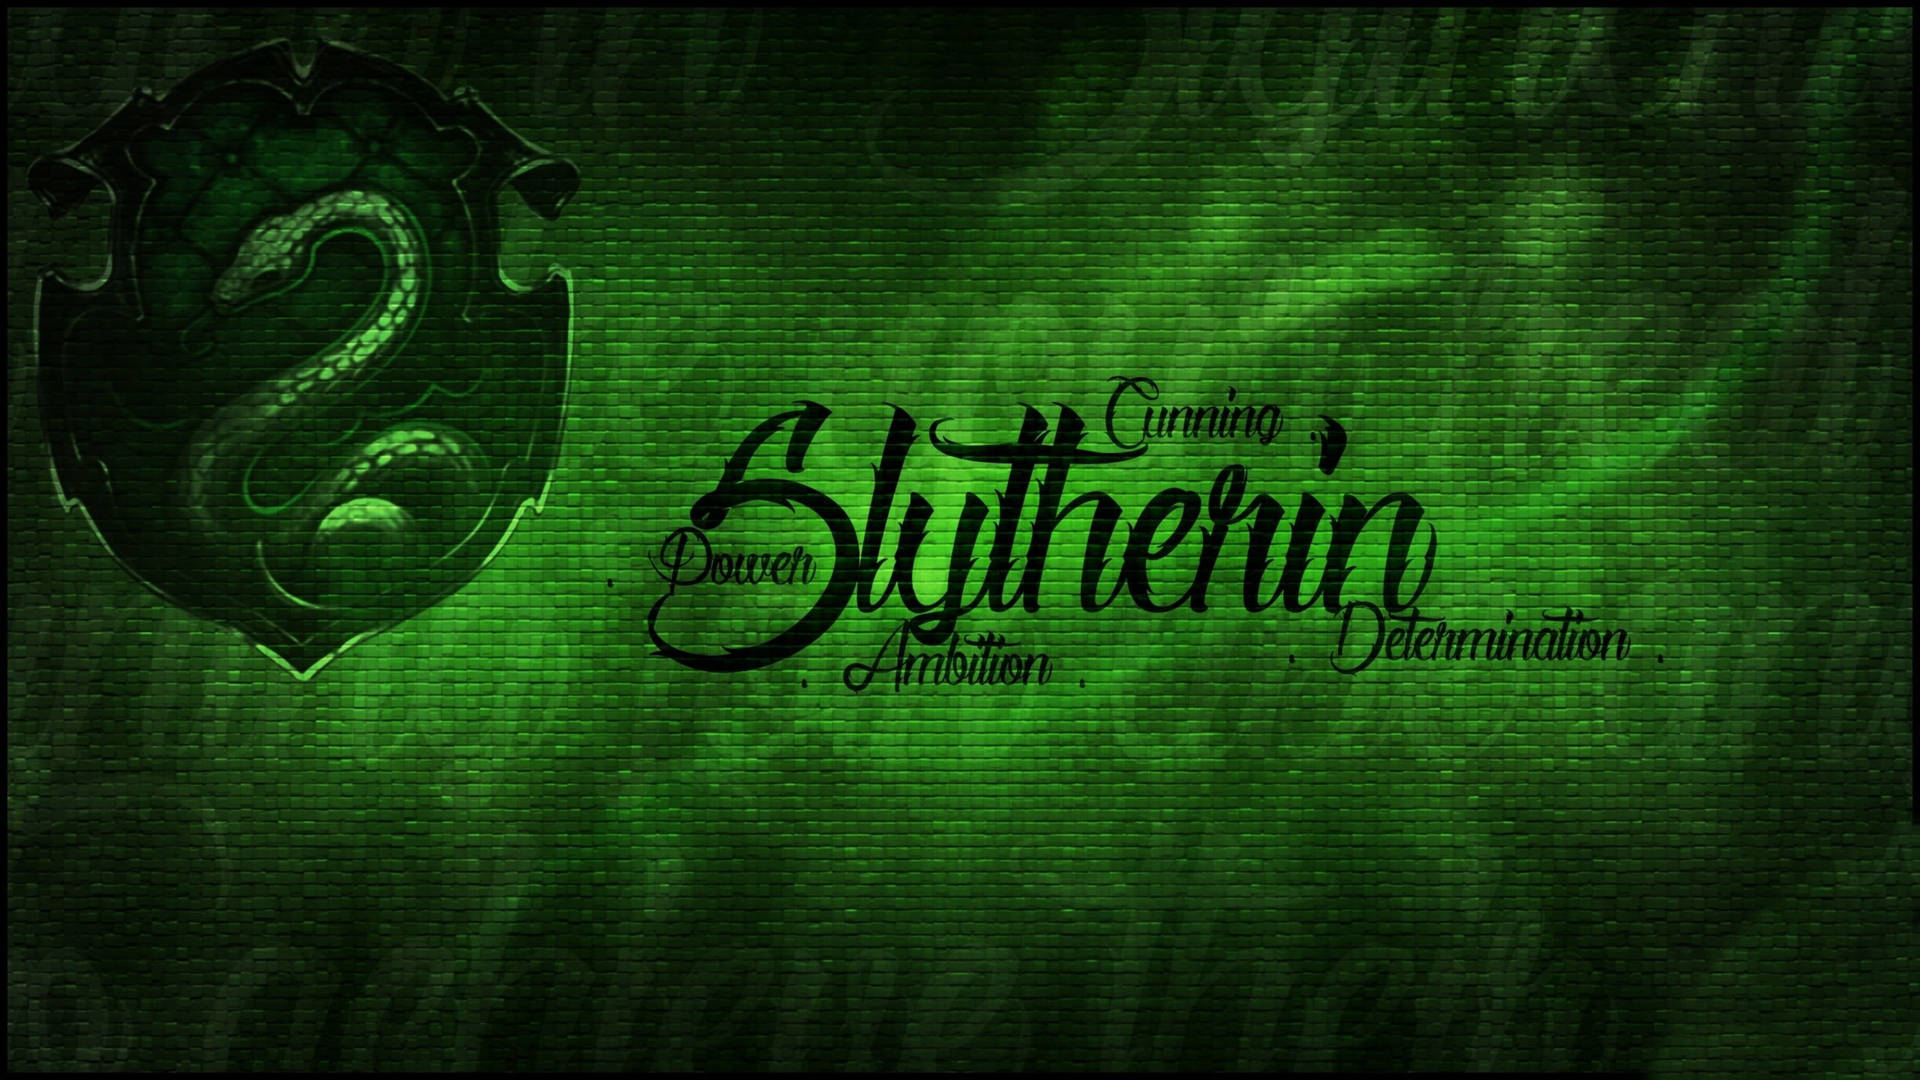 Free Slytherin Wallpaper Downloads, [100+] Slytherin Wallpapers for FREE |  